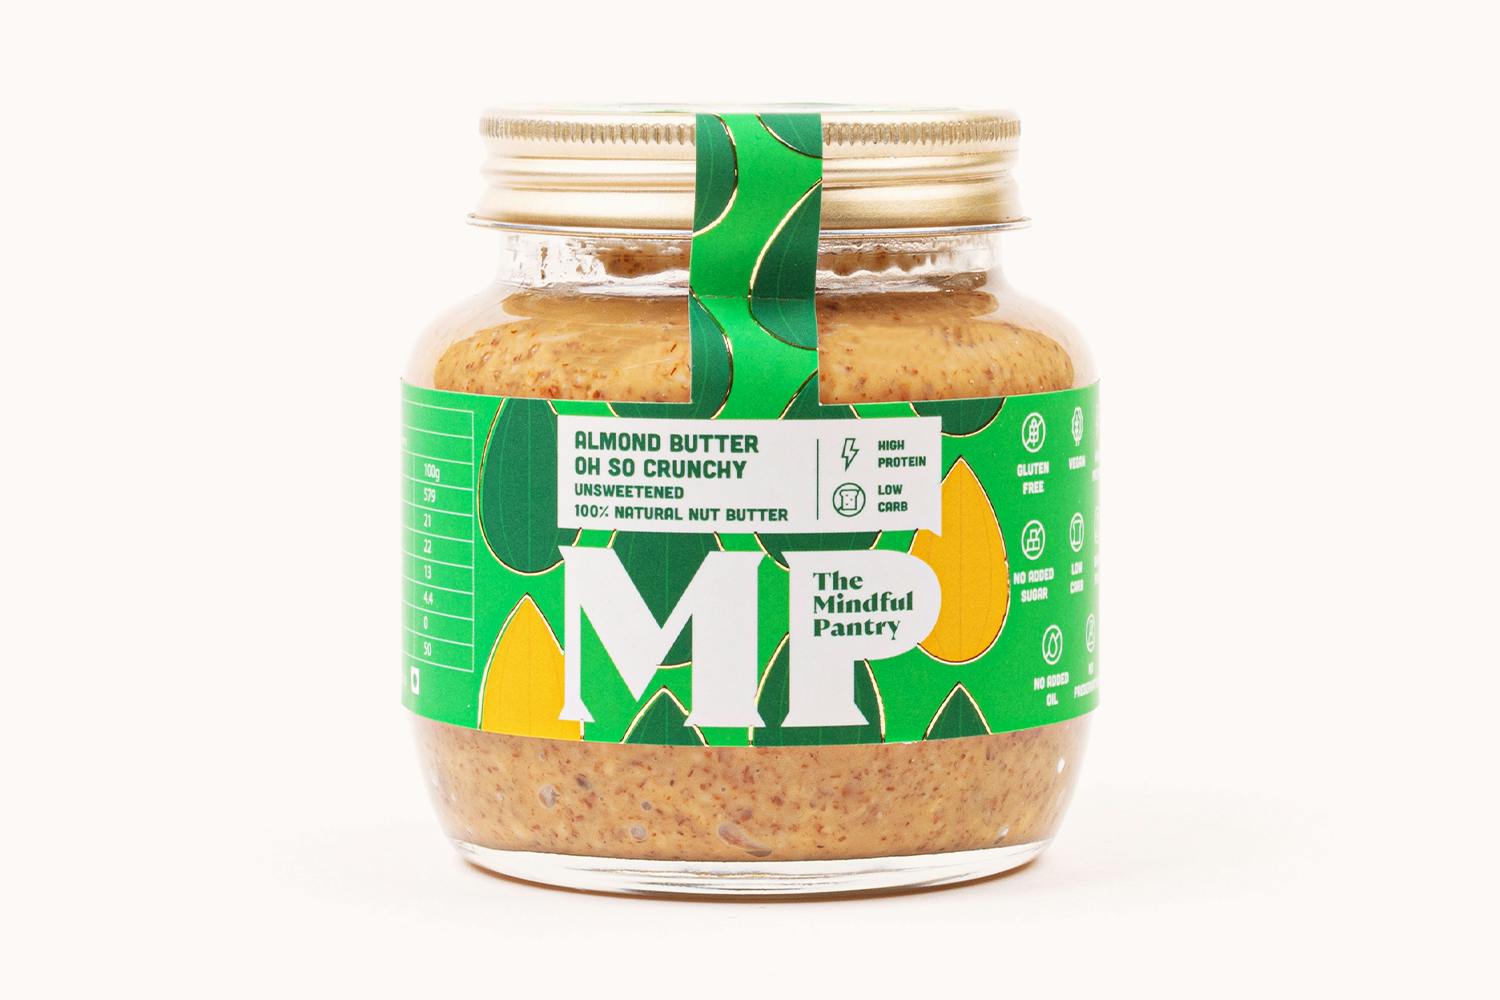 The Mindful Pantry Crunchy Almond Butter